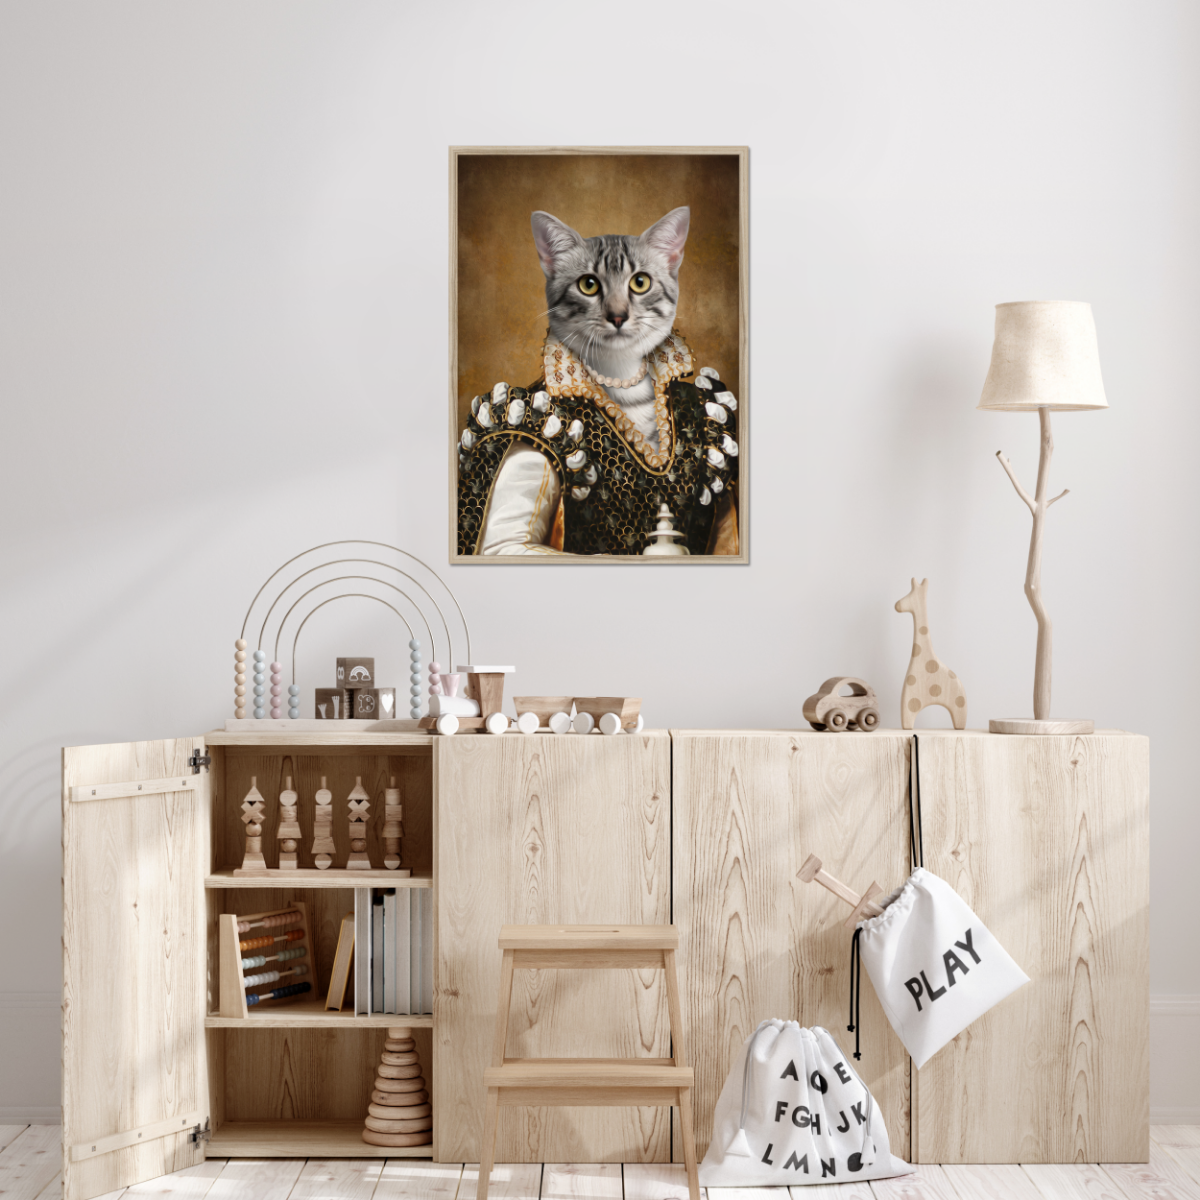 The Savant: Custom Framed Pet Portrait - Paw & Glory, paw and glory, dogs in uniform prints, victorian pet portraits, in home pet photography, pet photos on canvas, star wars dog painting, pet portraits